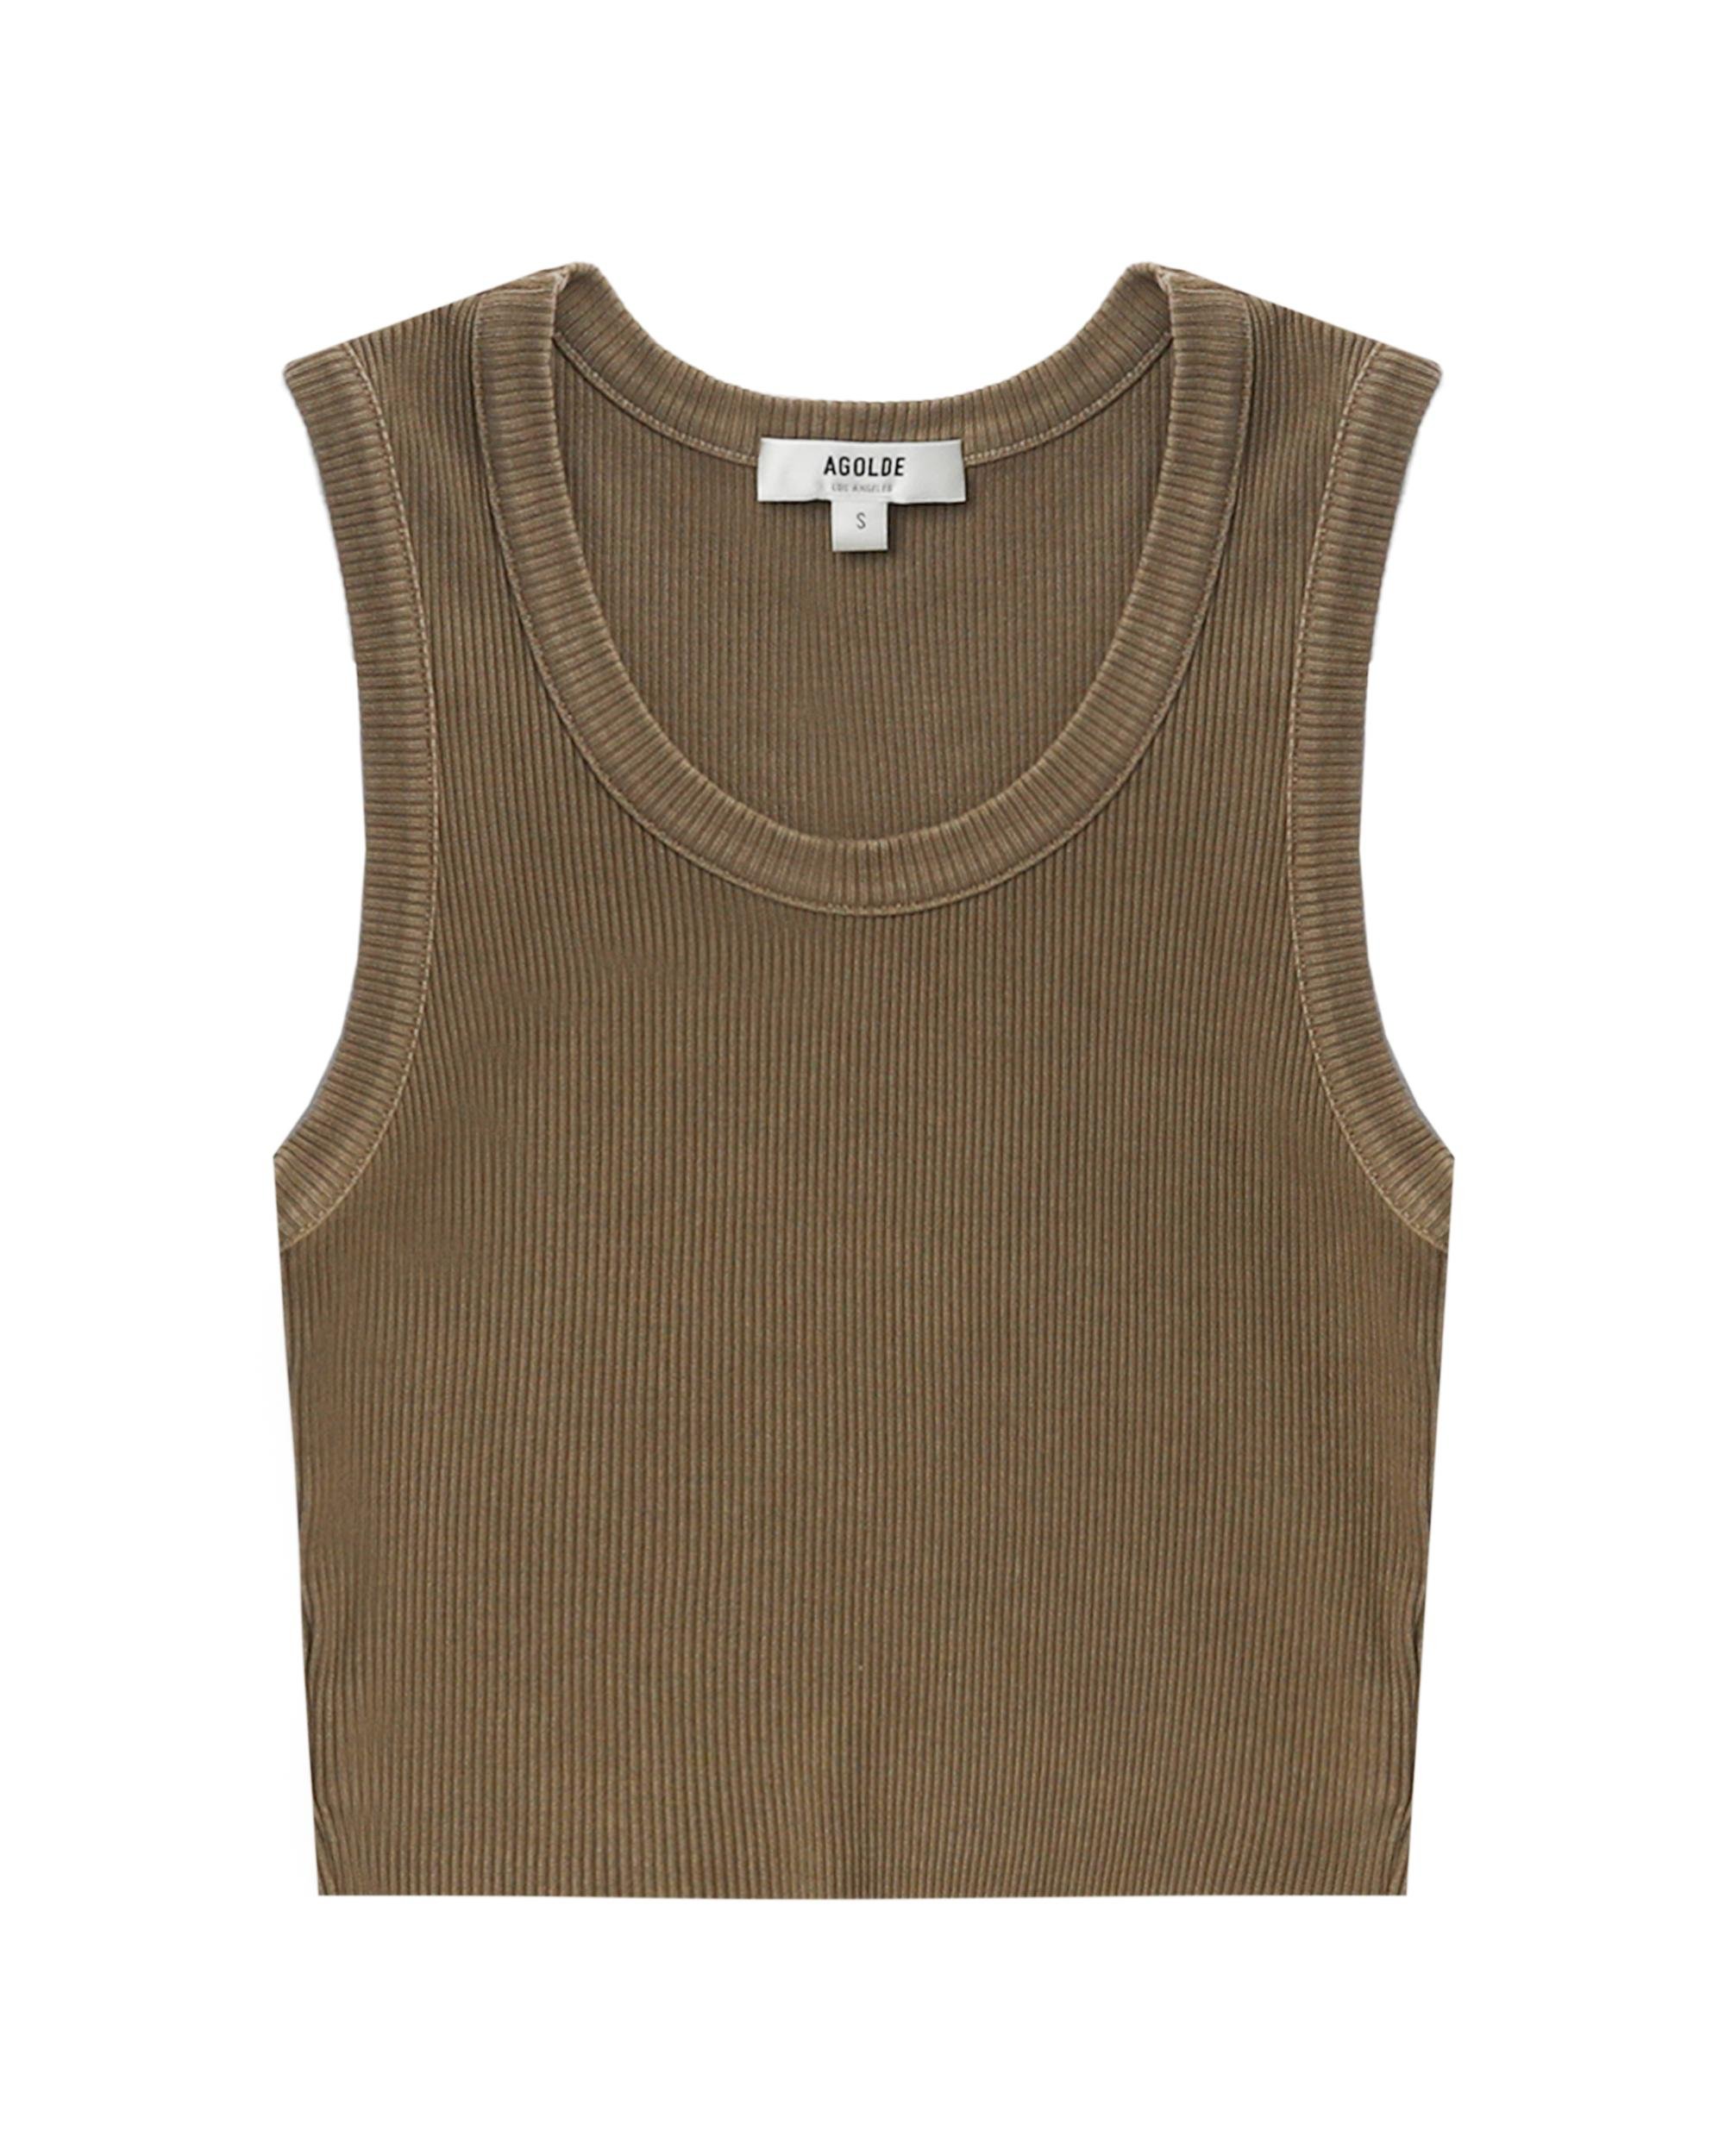 Rib vest by AGOLDE